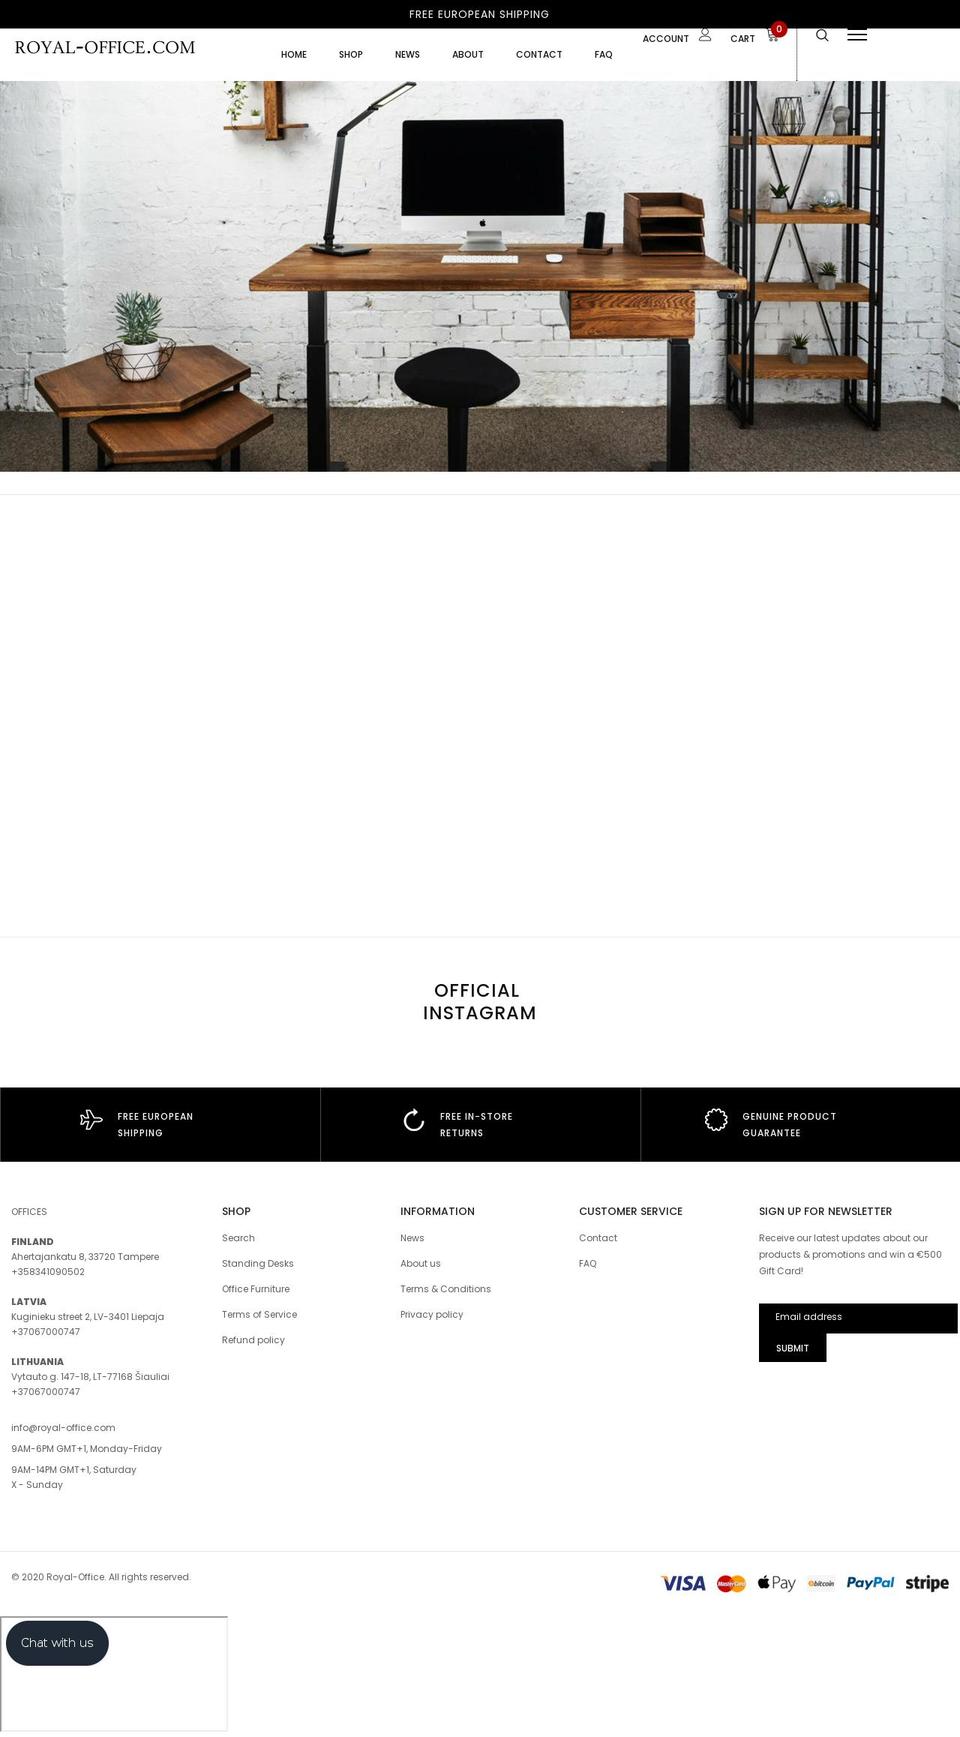 WATCHES Shopify theme site example royal-office.com